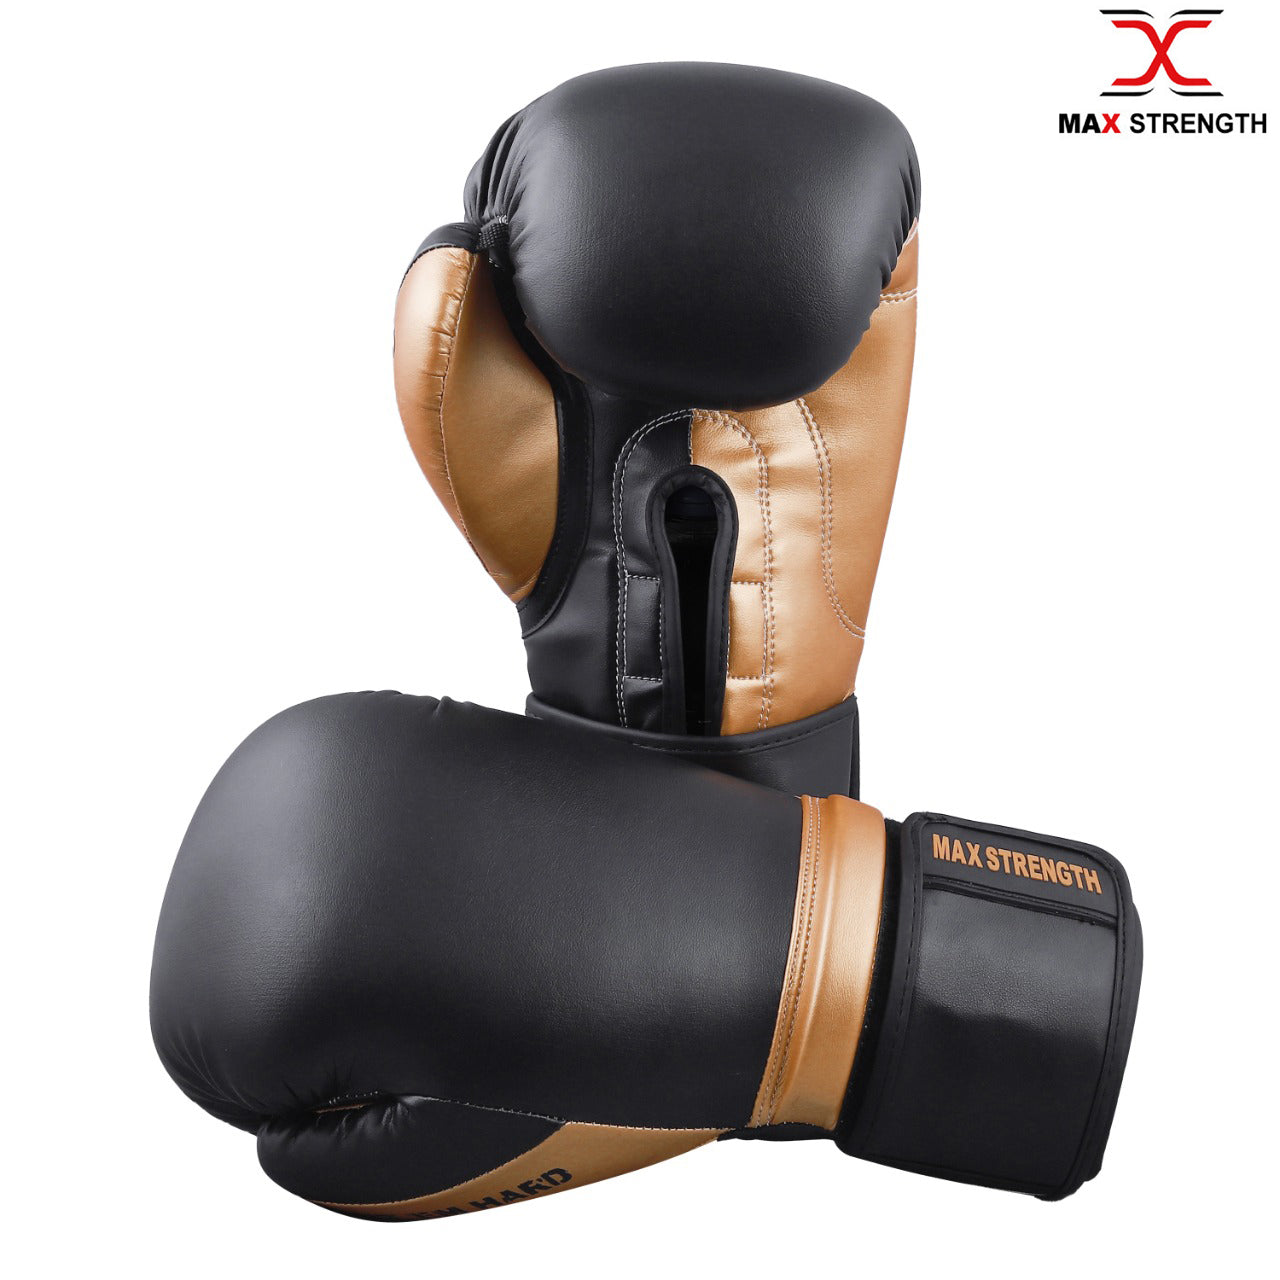 Boxing Gloves for Pro Fighters